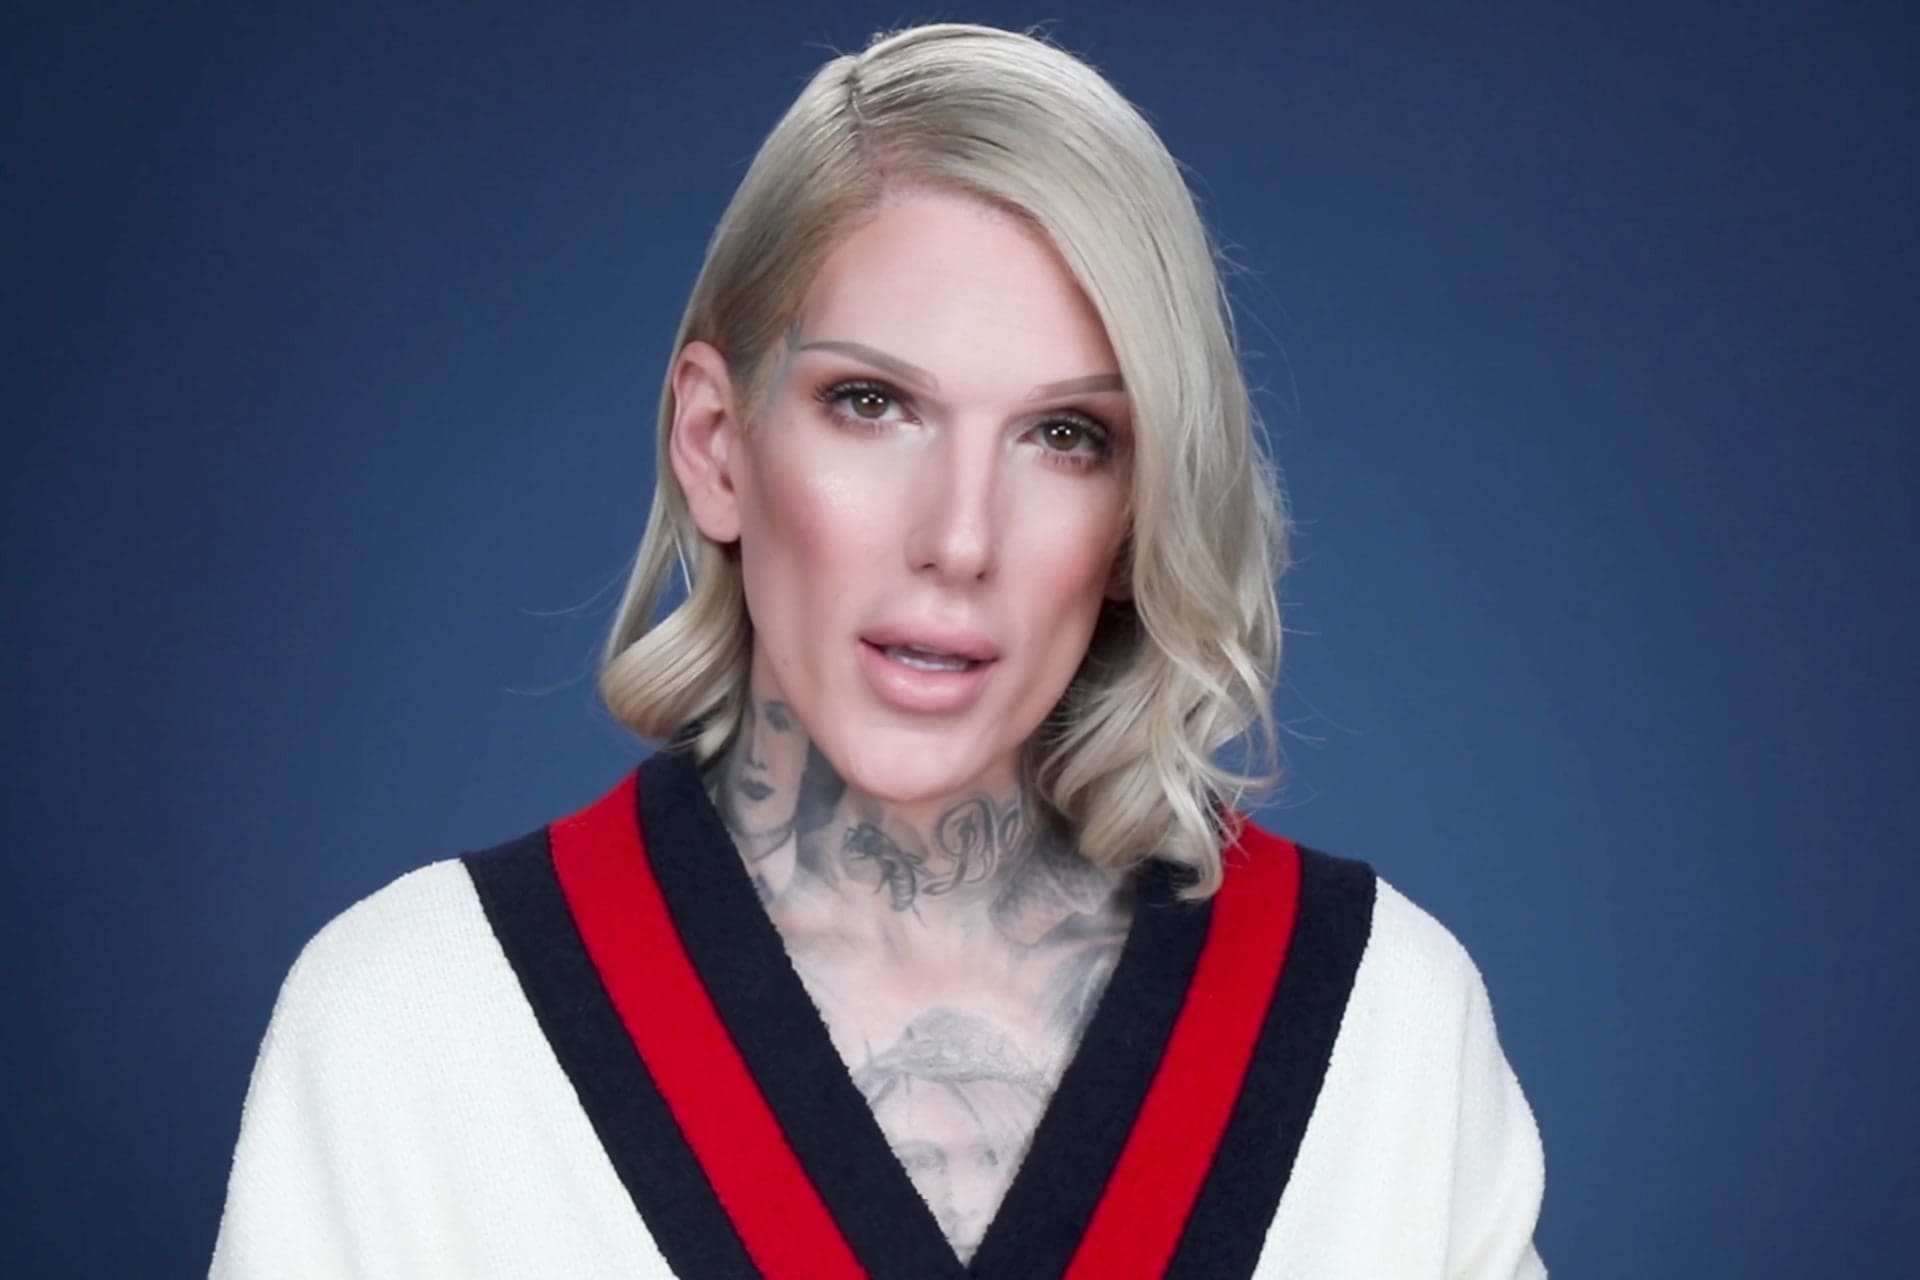 jeffree-star-updates-his-fans-after-scary-car-accident-my-back-is-broken